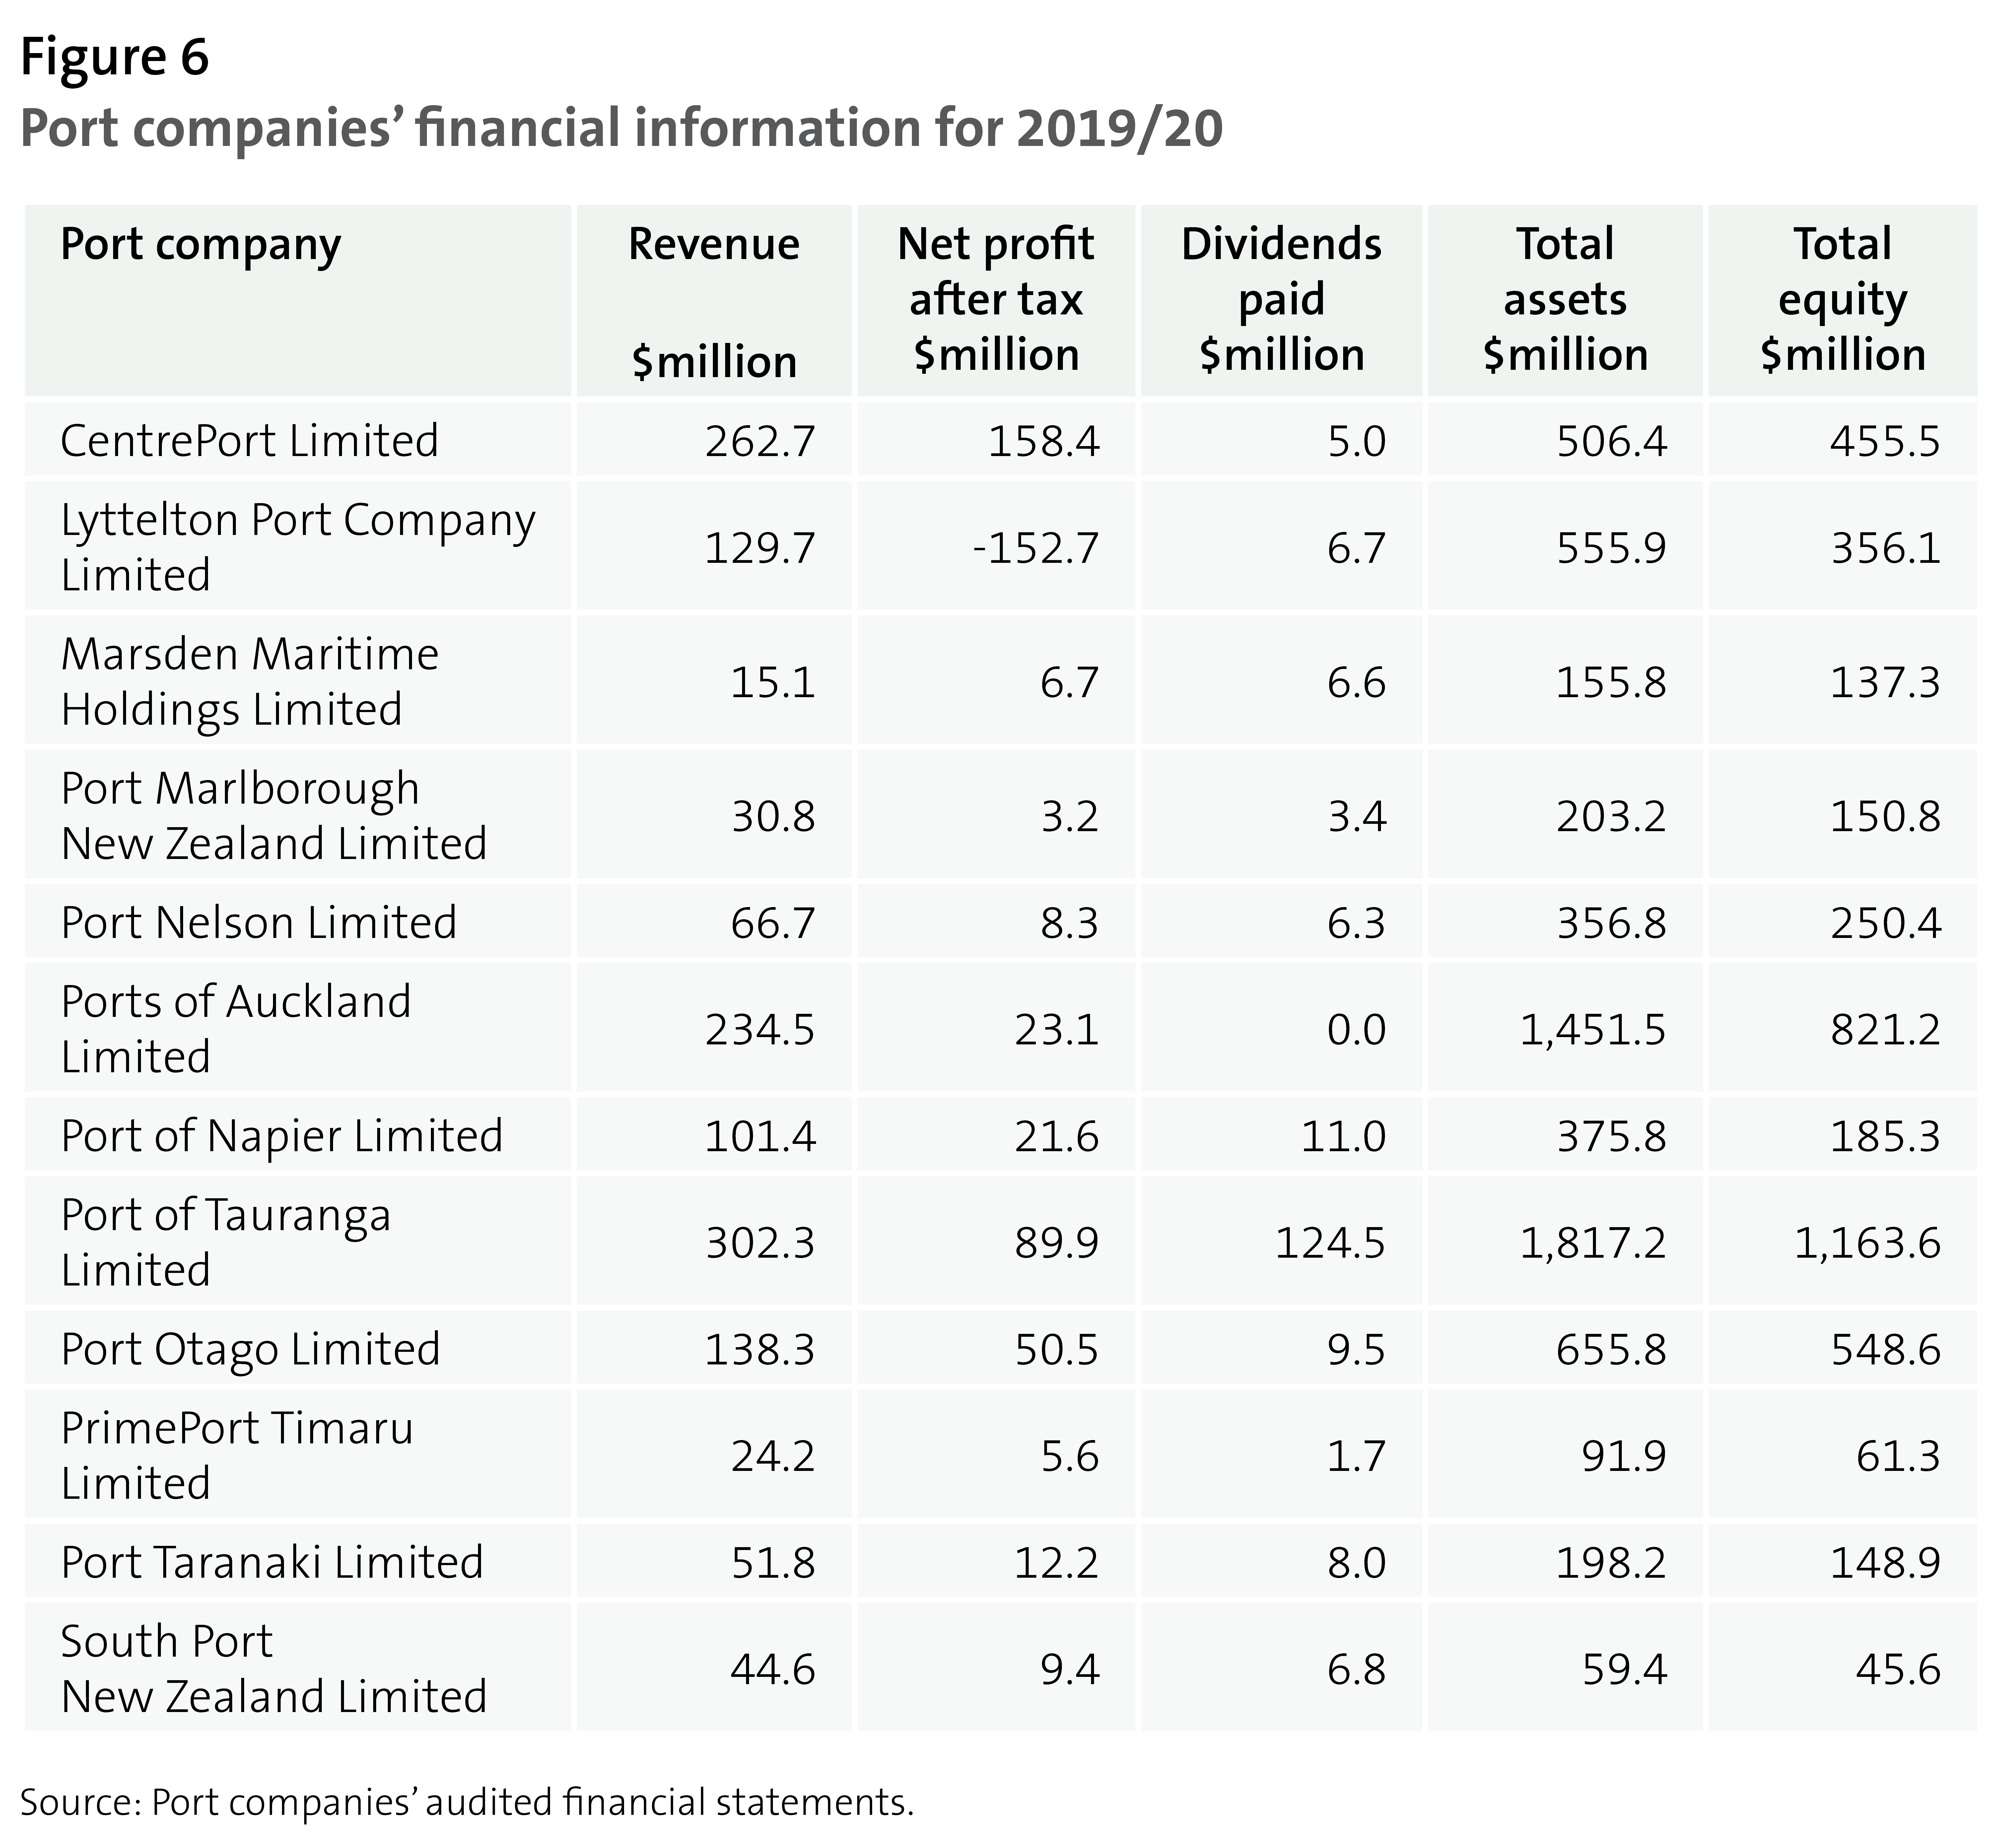 Figure 6 - Port companies' financial information for 2019/20